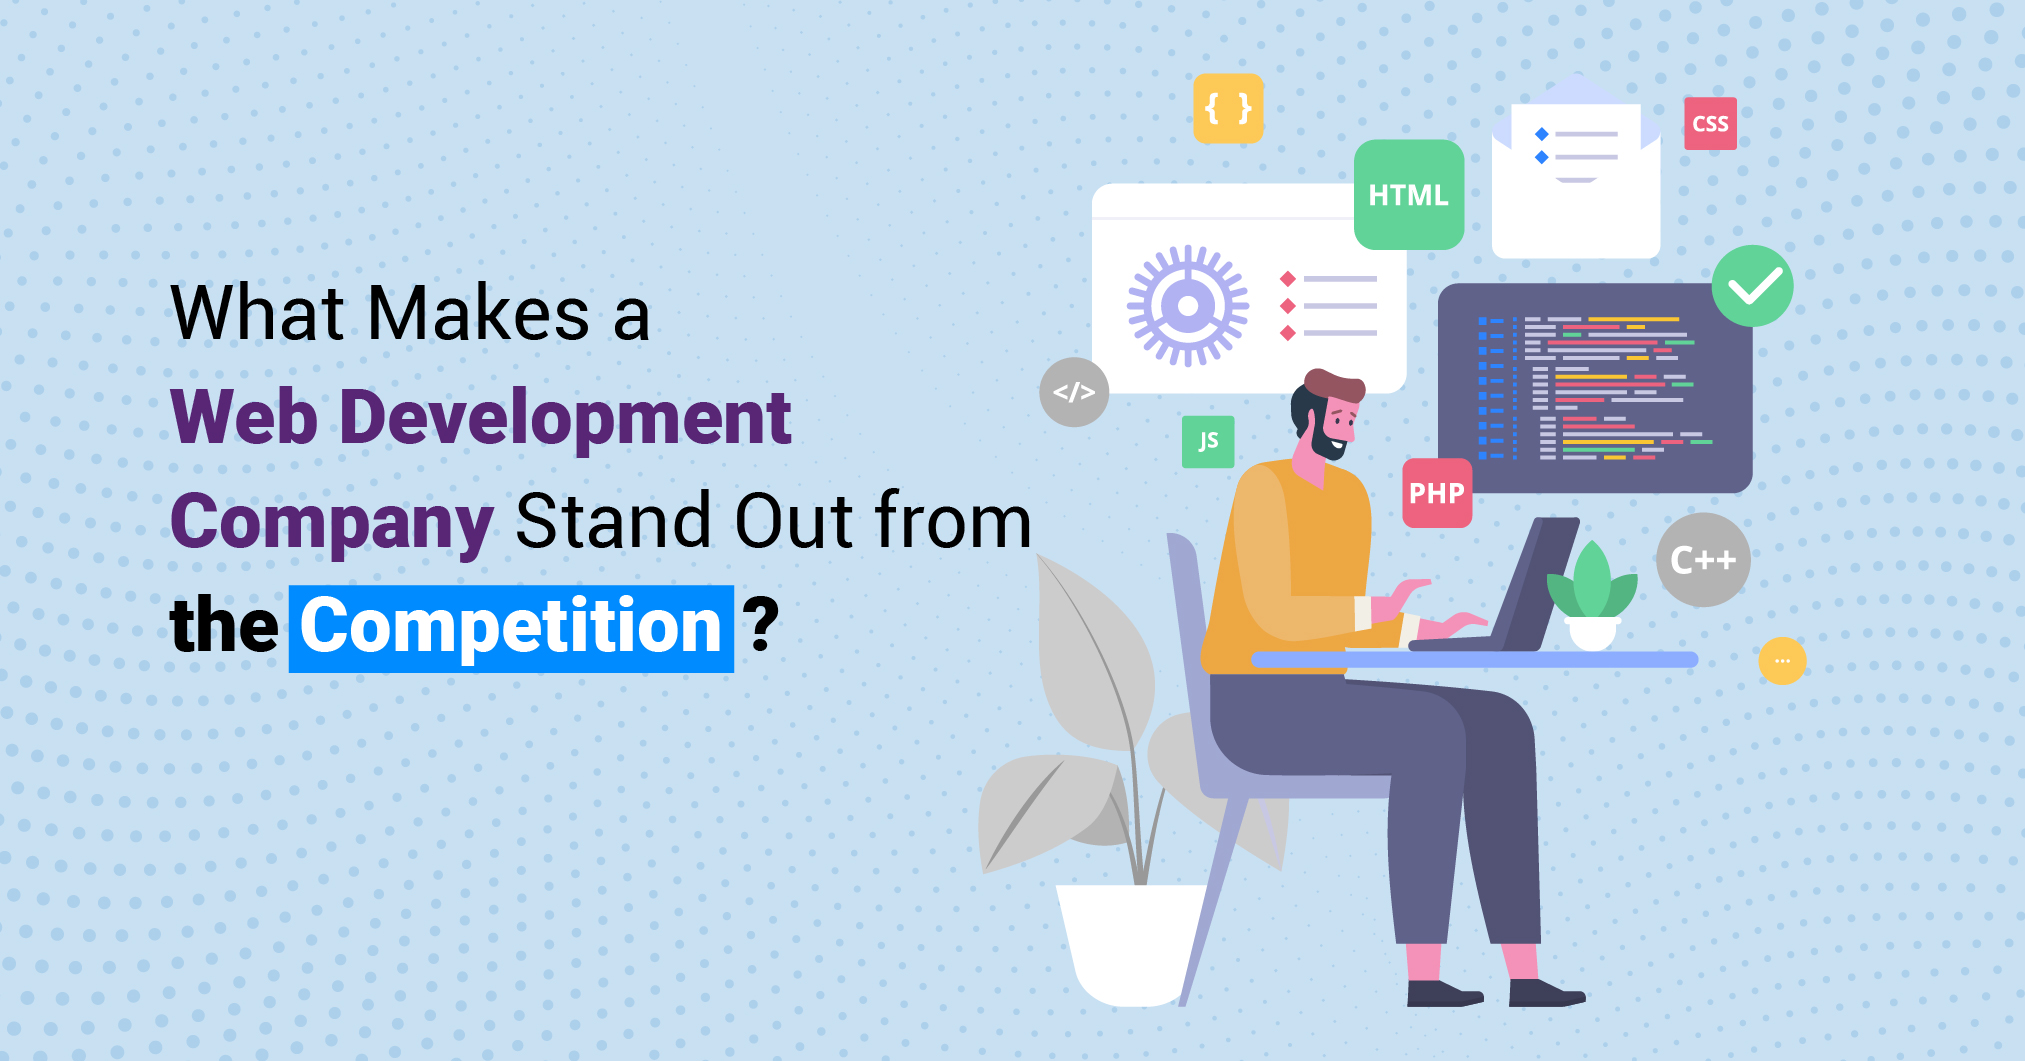 What Makes a Web Development Company Stand Out from the Competition?